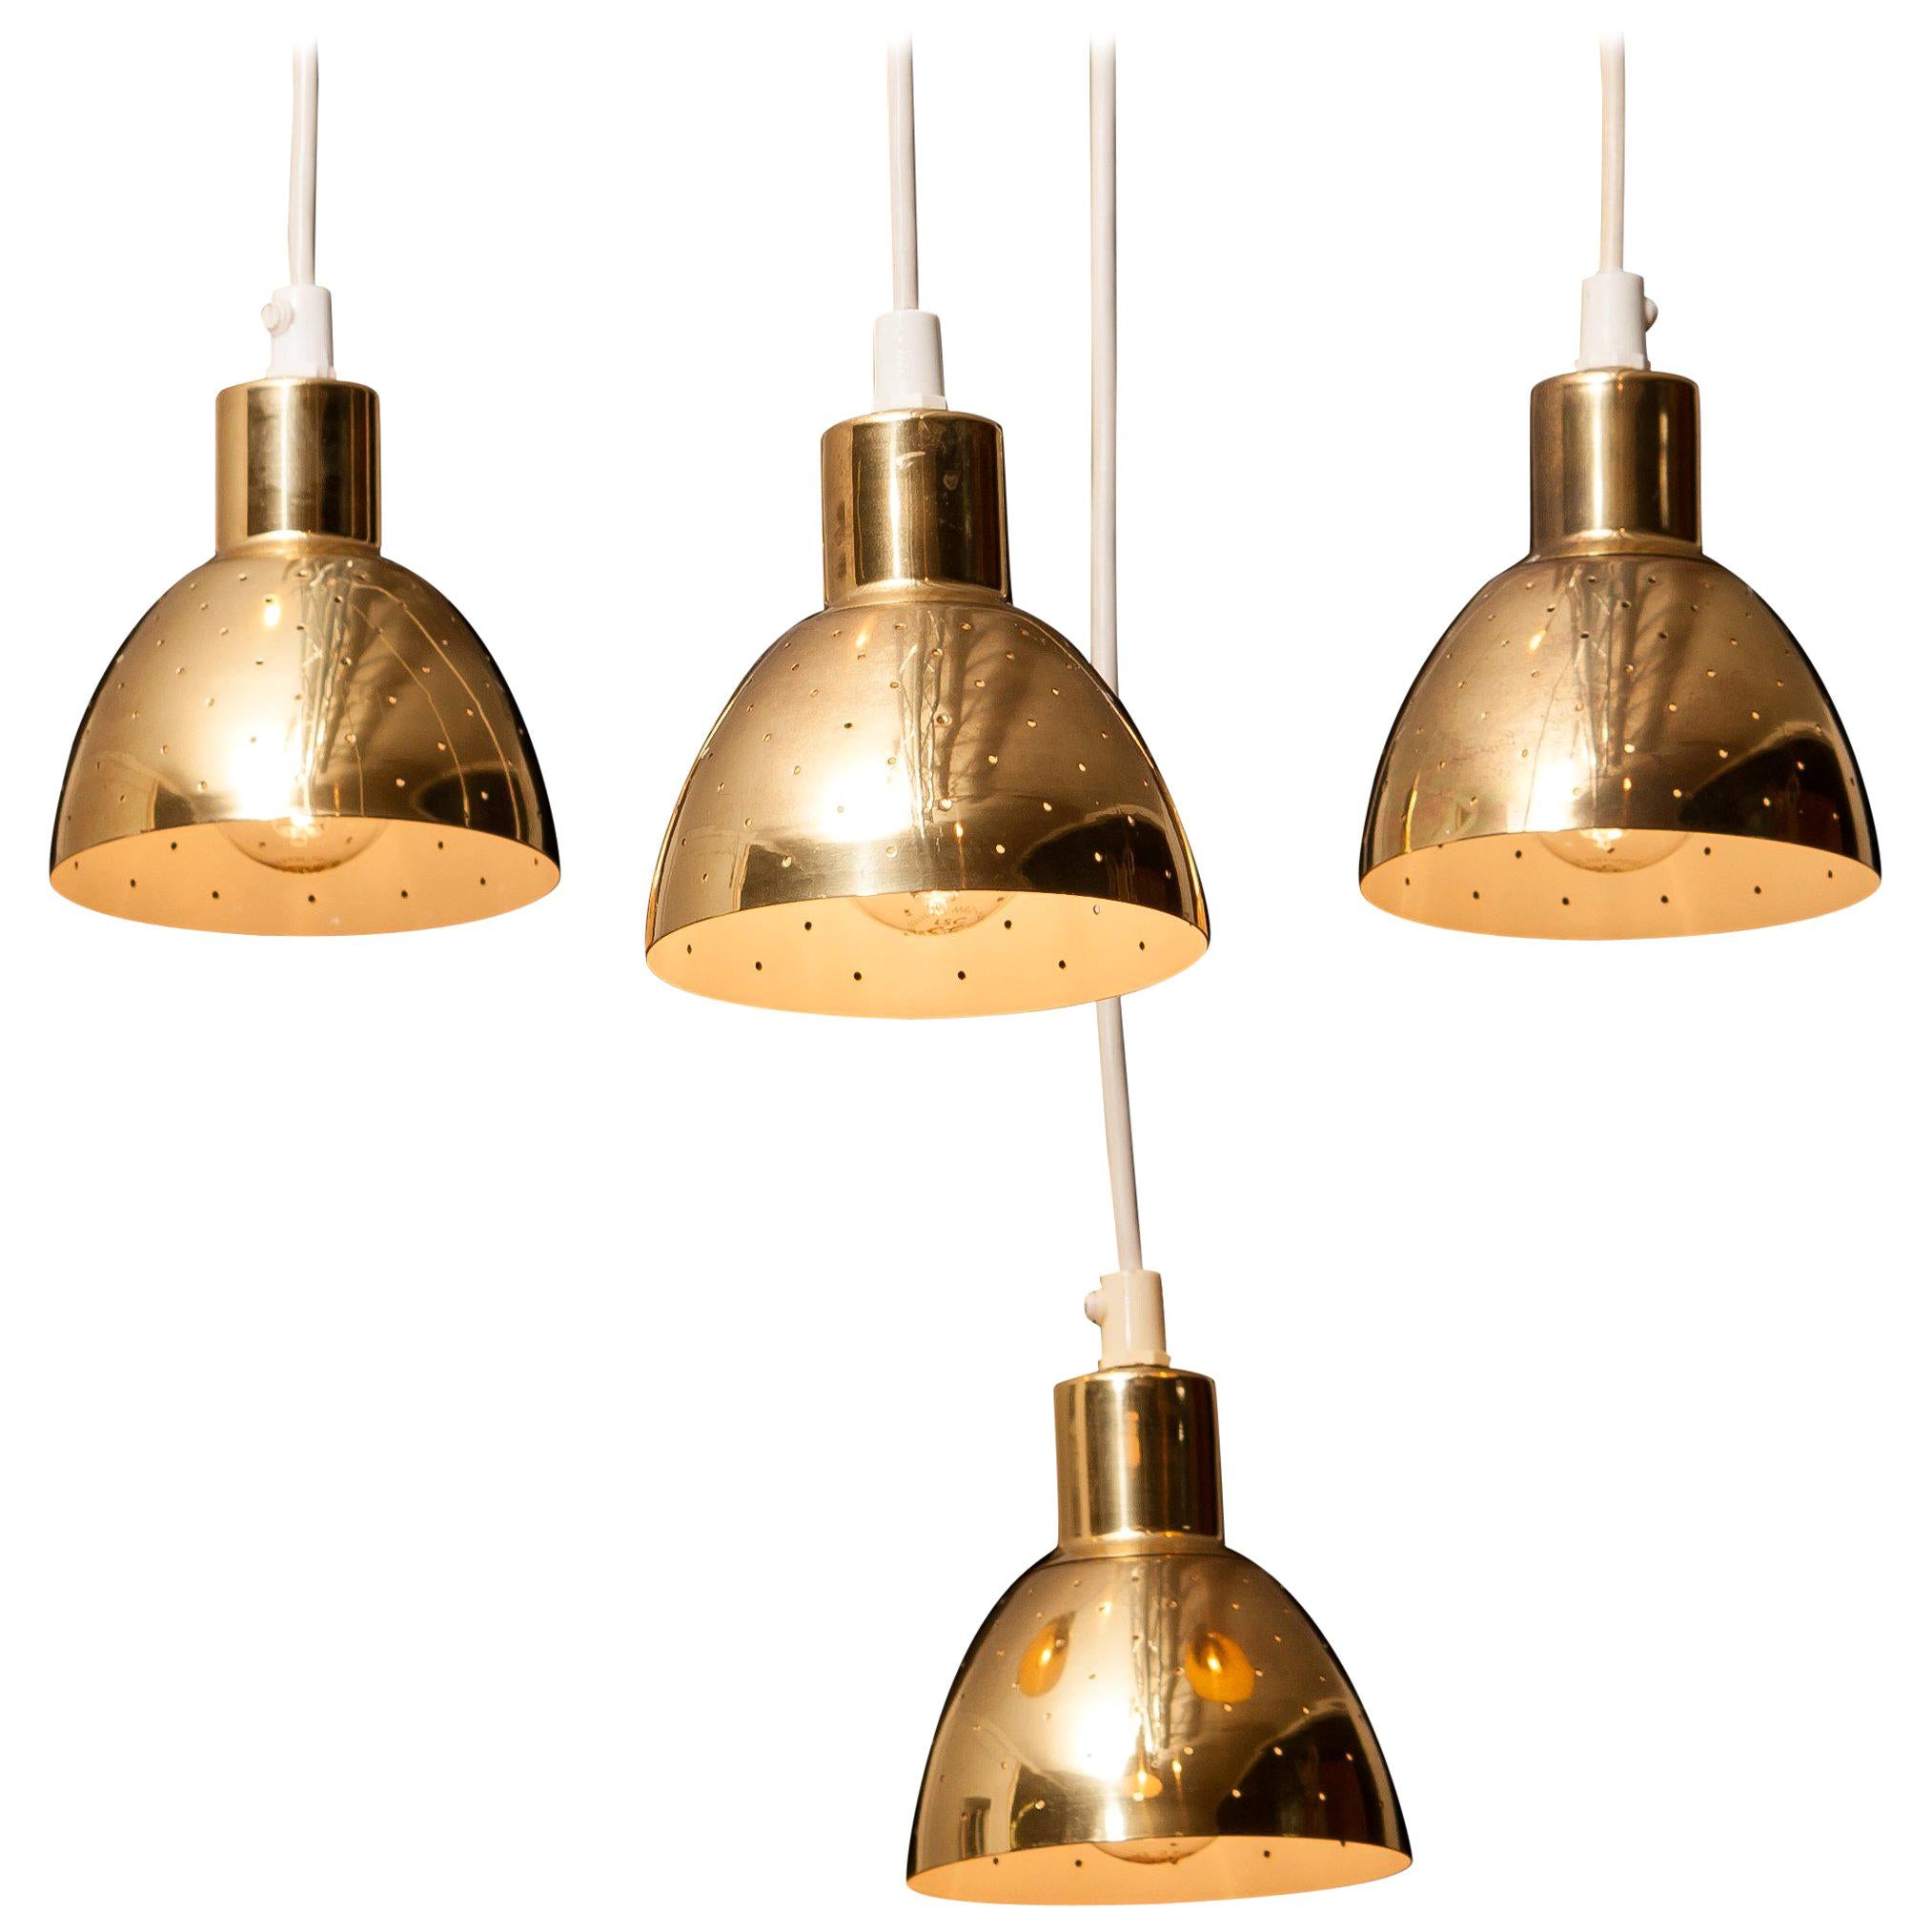 Great set of four brass pendants by Hans-Agne Jakobsson for Markaryd, Sweden.
Each lamp has perforation with gives the light a beautiful shining.
They are in a good and working condition.
Period 1960s.
Dimensions: H 11 cm, ø 11 cm.